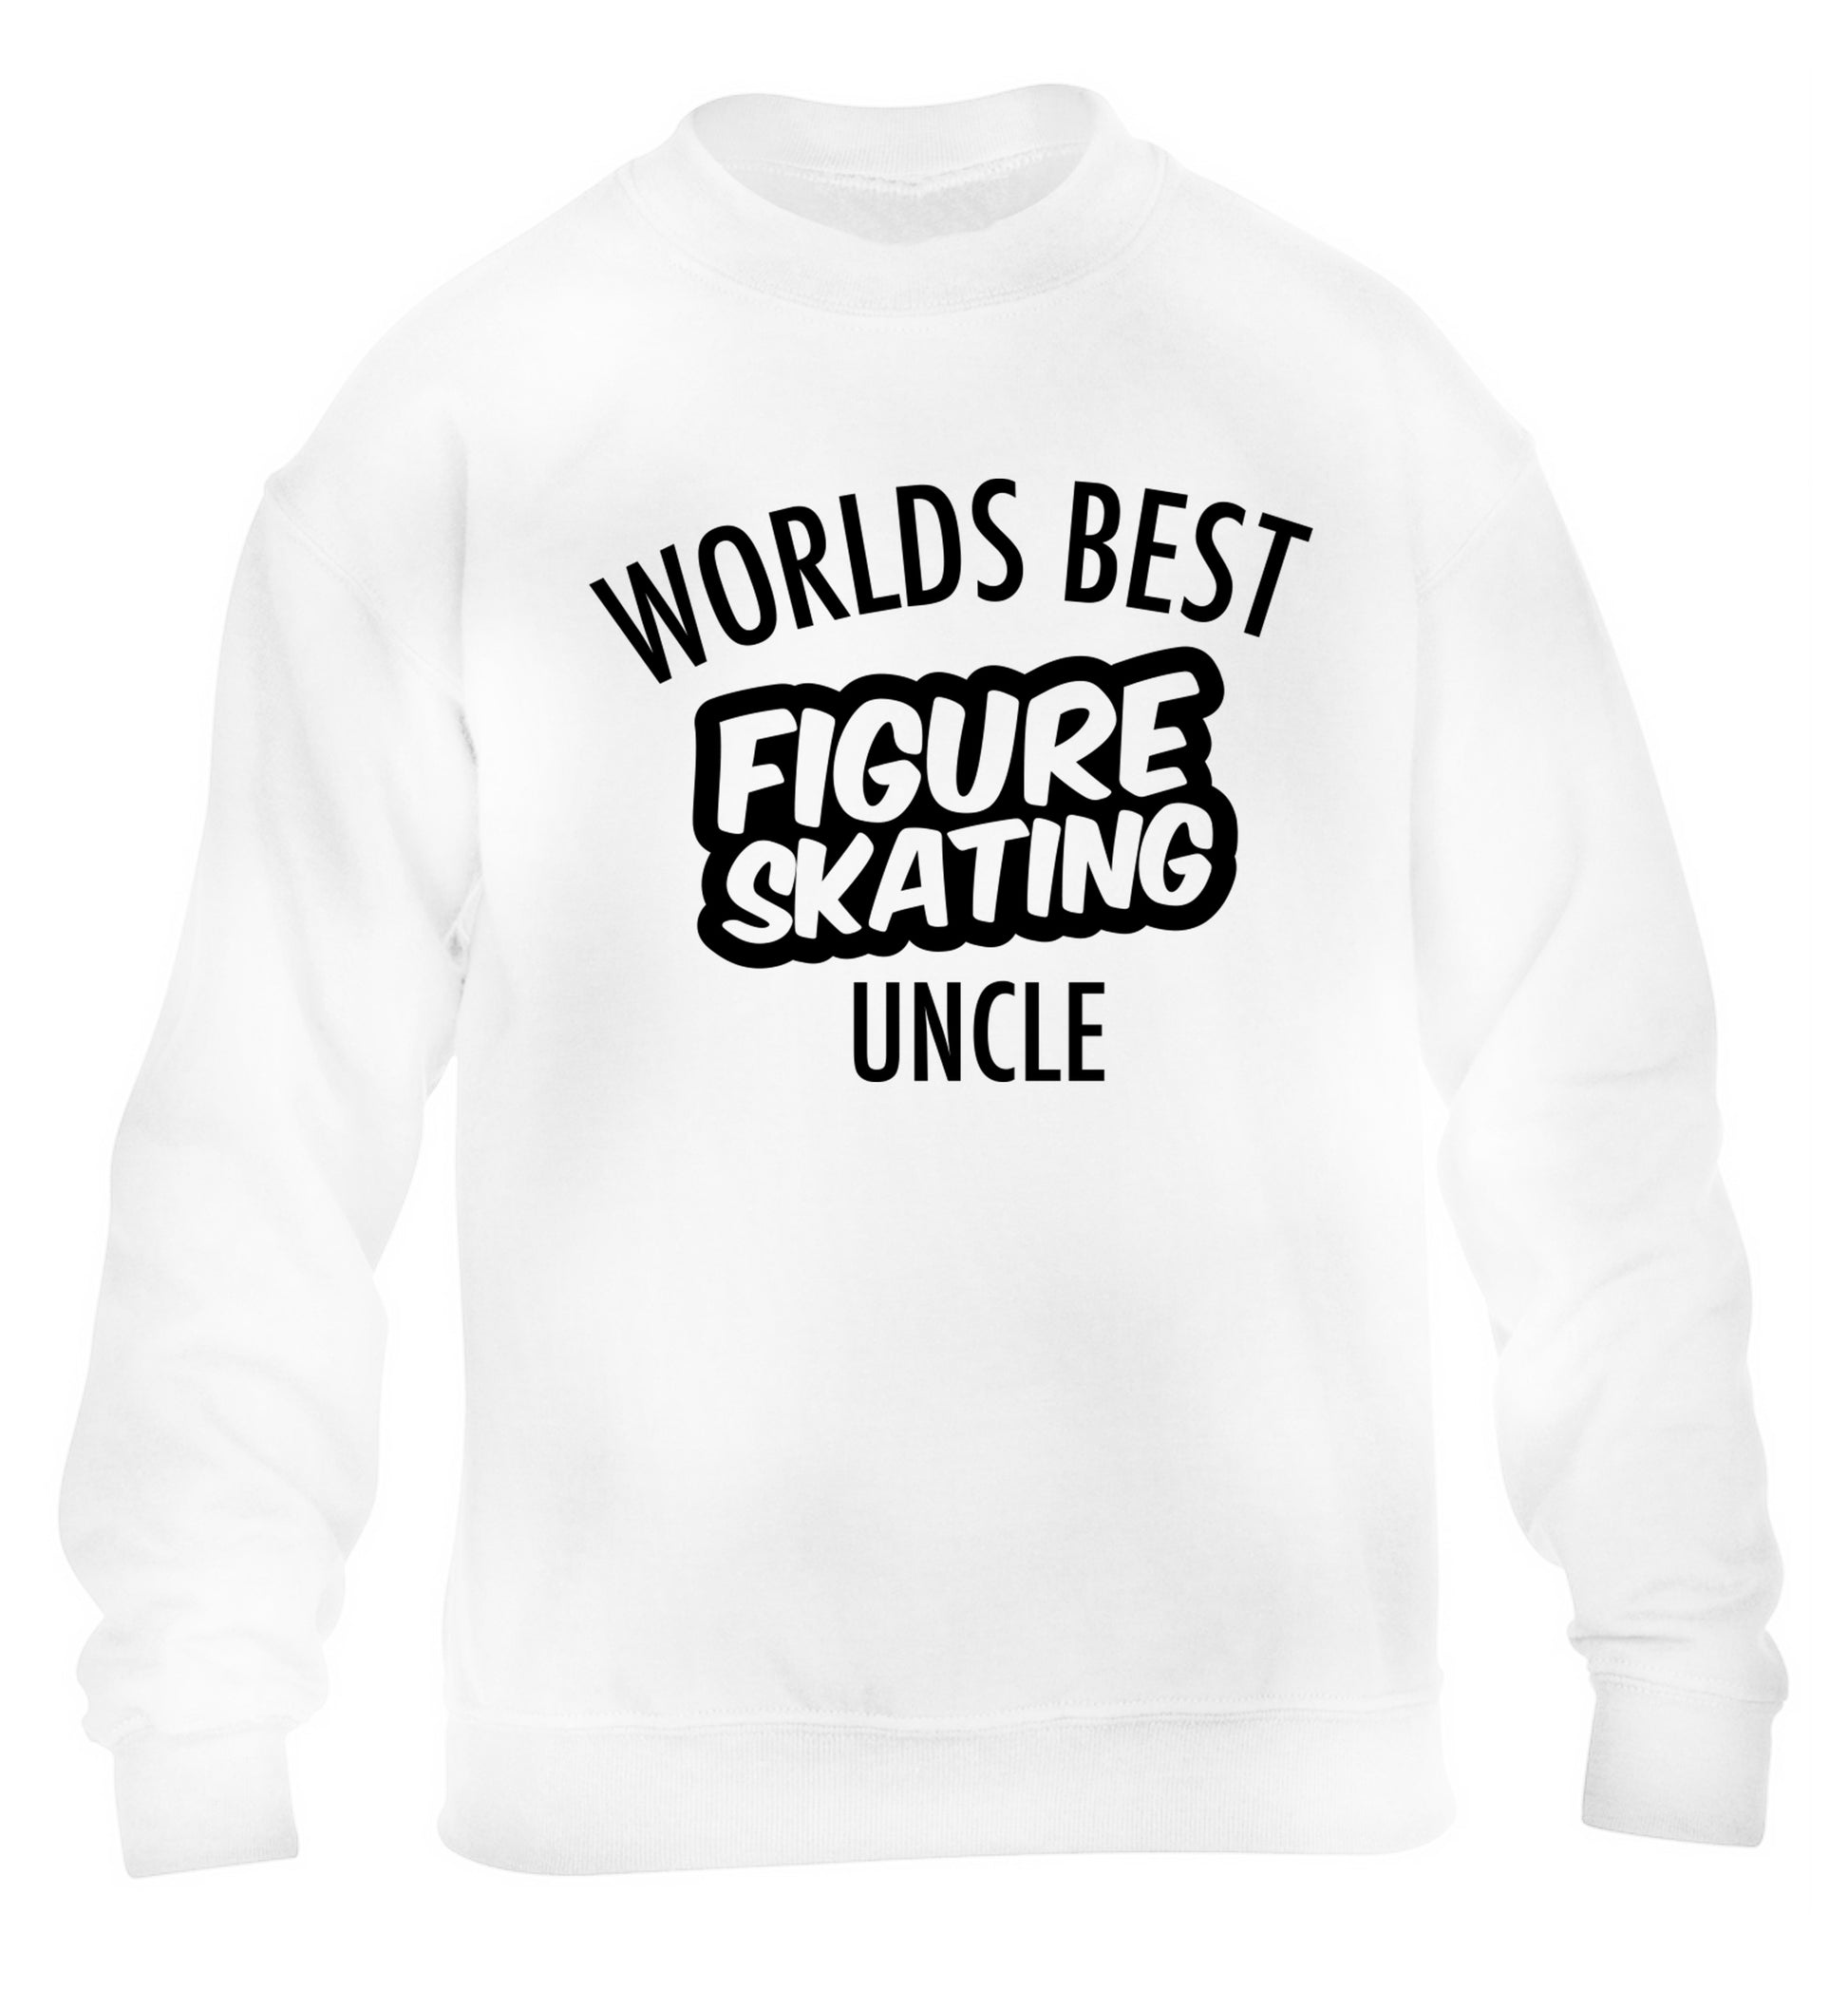 Worlds best figure skating uncle children's white sweater 12-14 Years